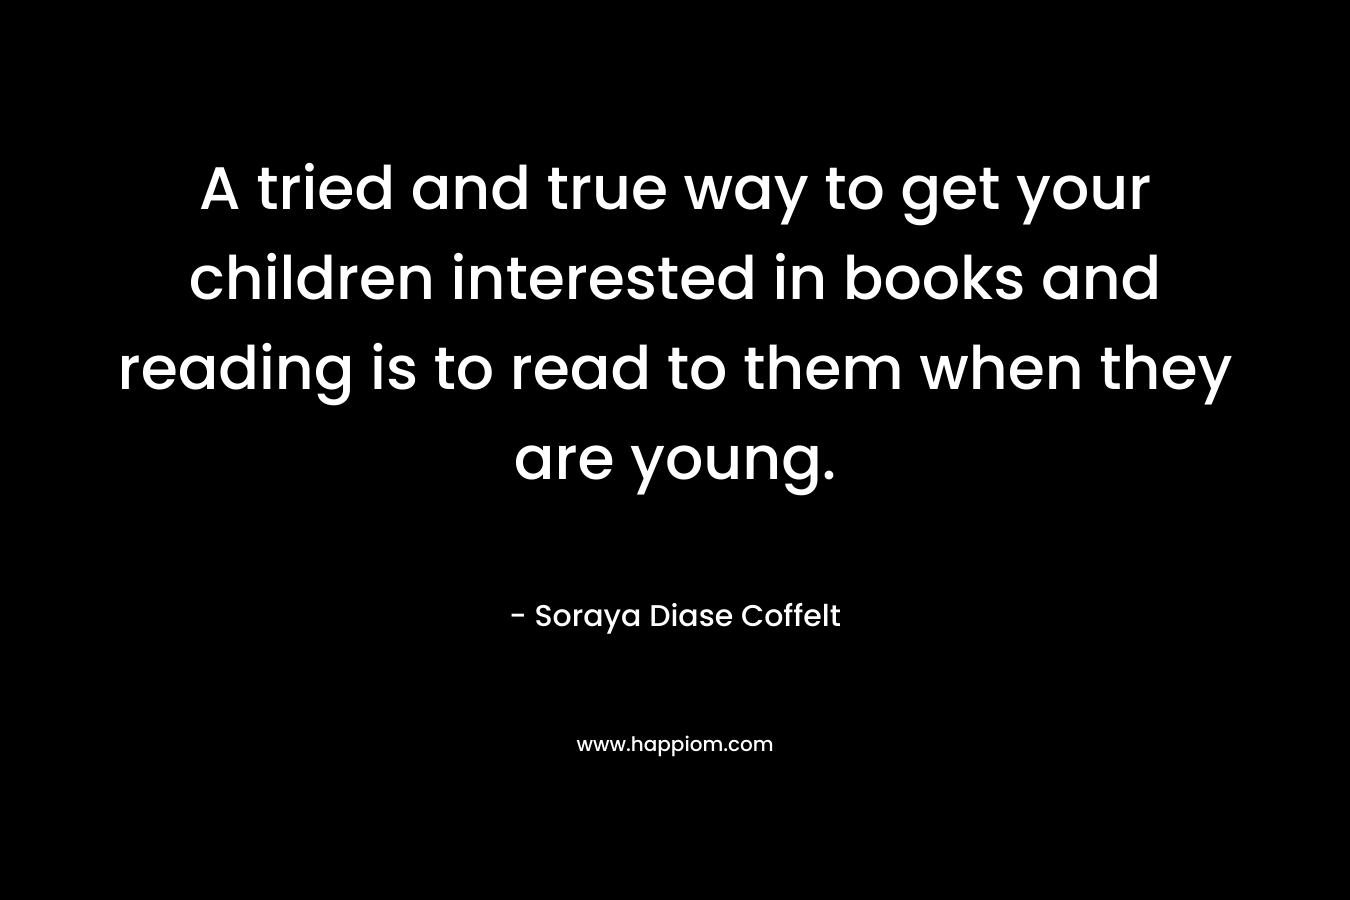 A tried and true way to get your children interested in books and reading is to read to them when they are young.